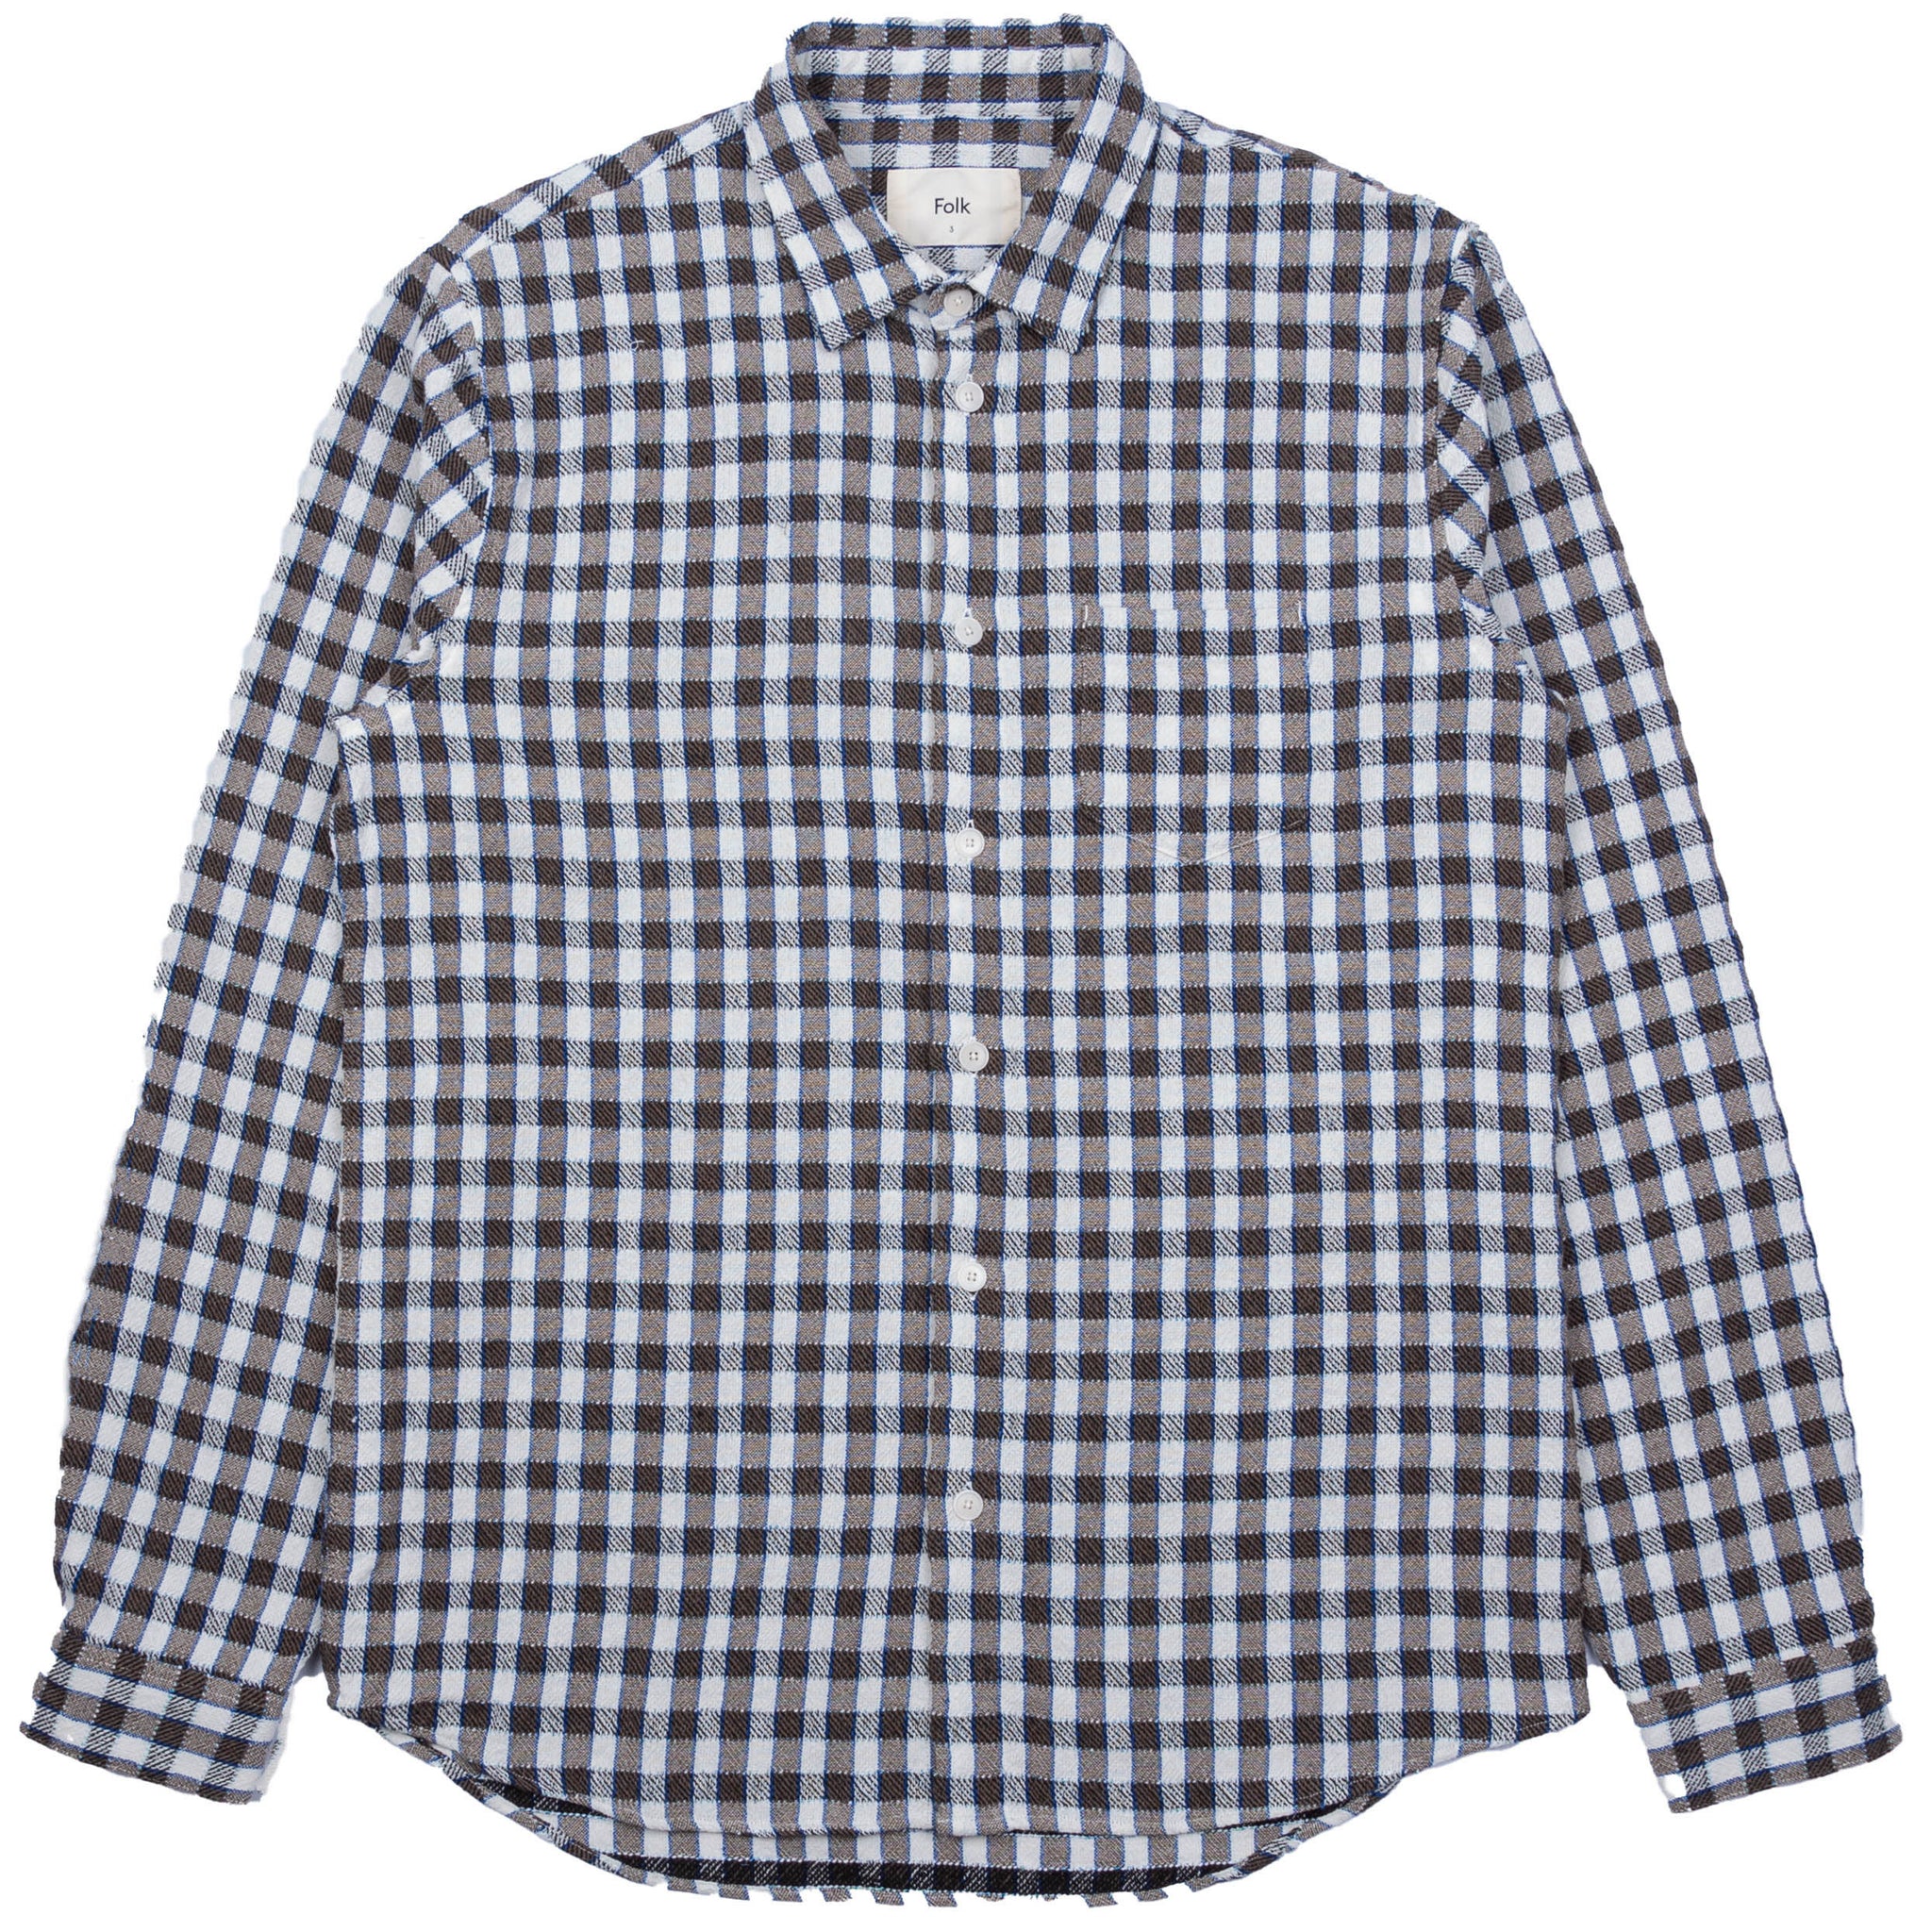 Relaxed Fit Shirt - Brown/Cobalt Check